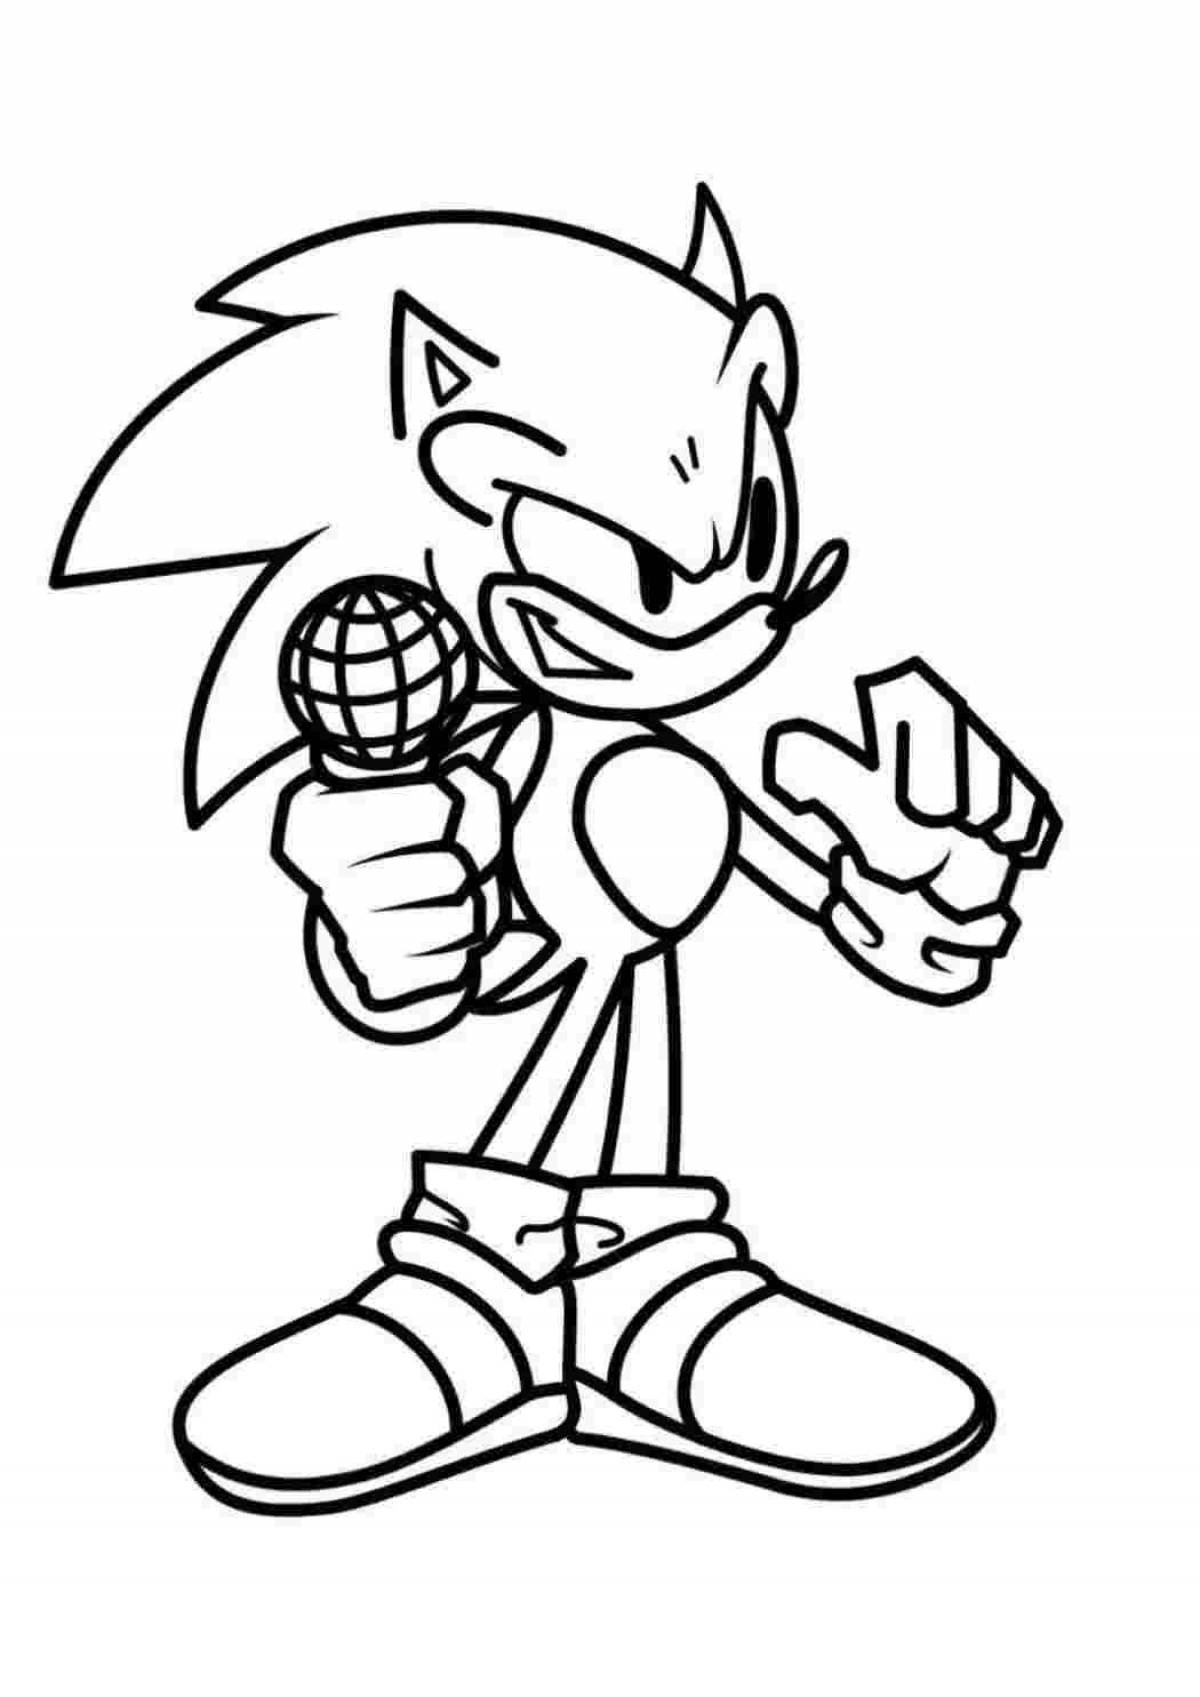 Exciting sonic force coloring book